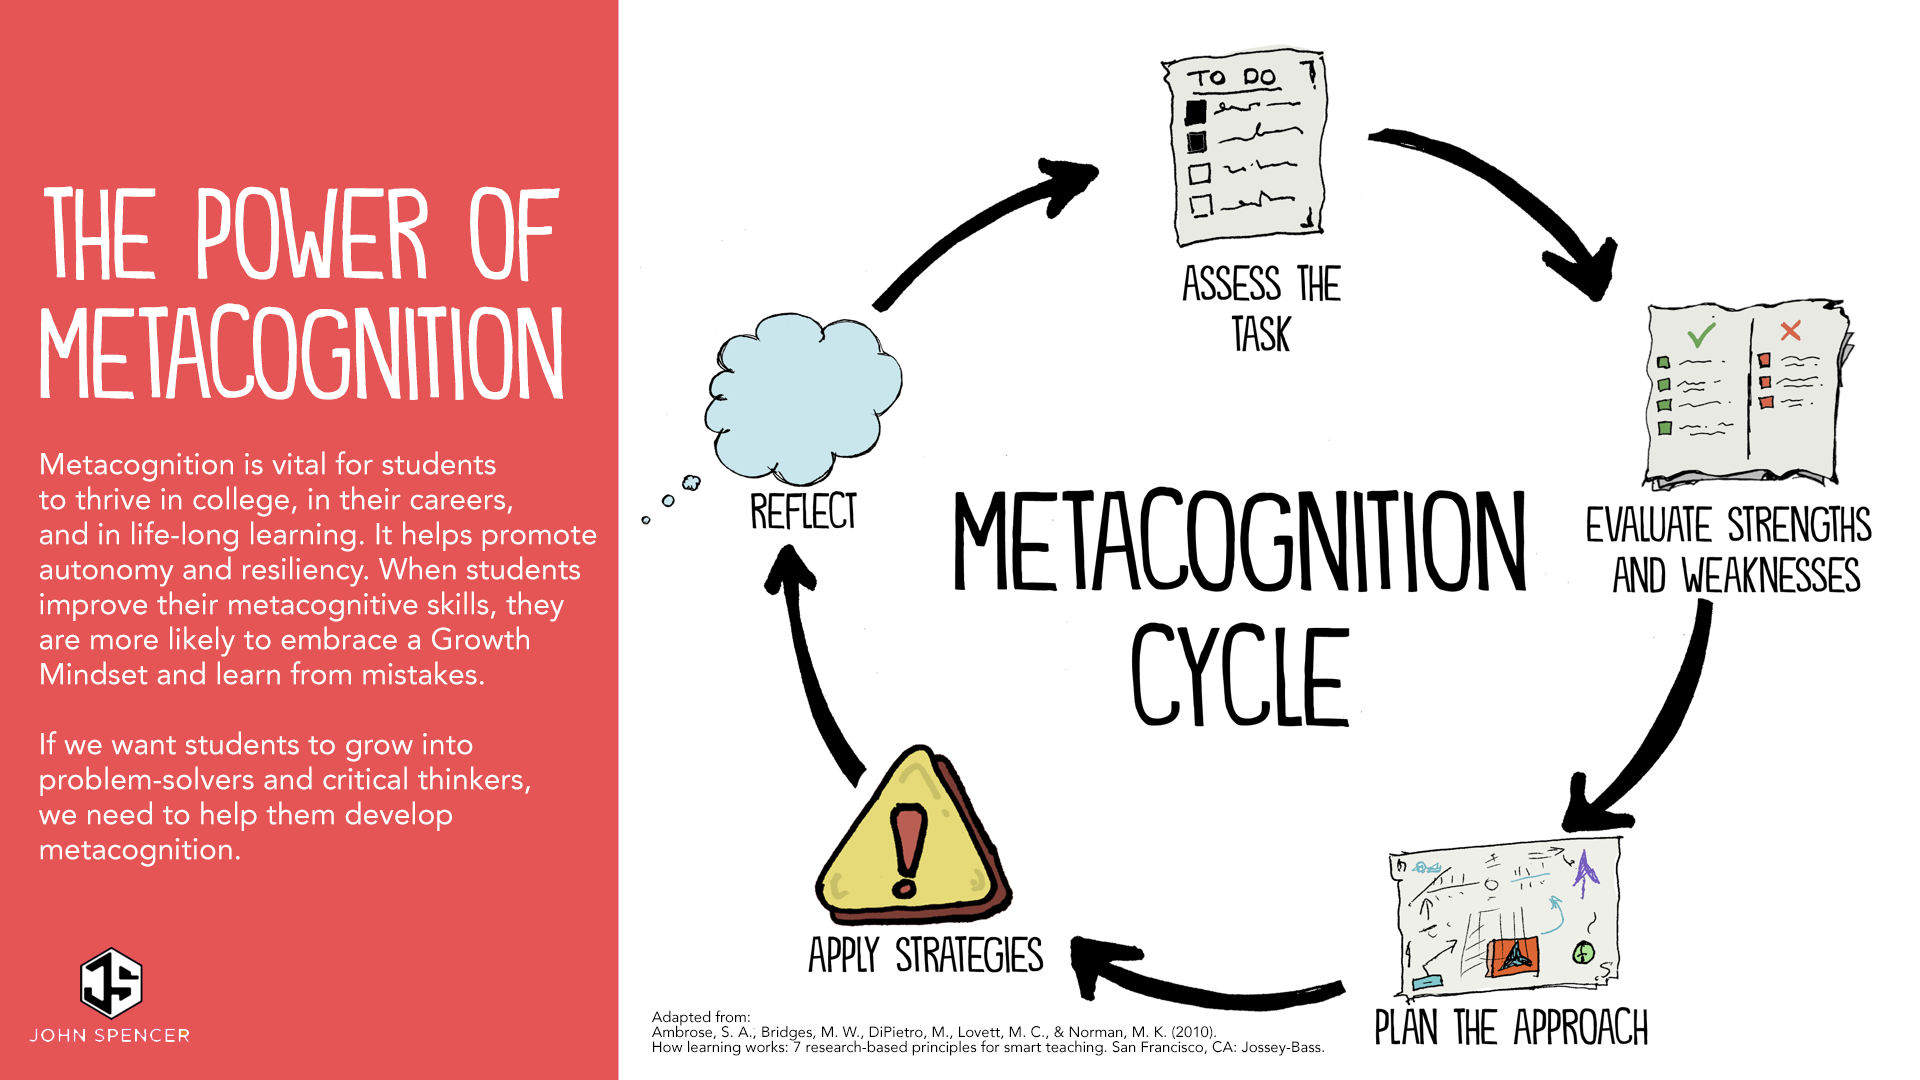 thinking about thinking metacognition